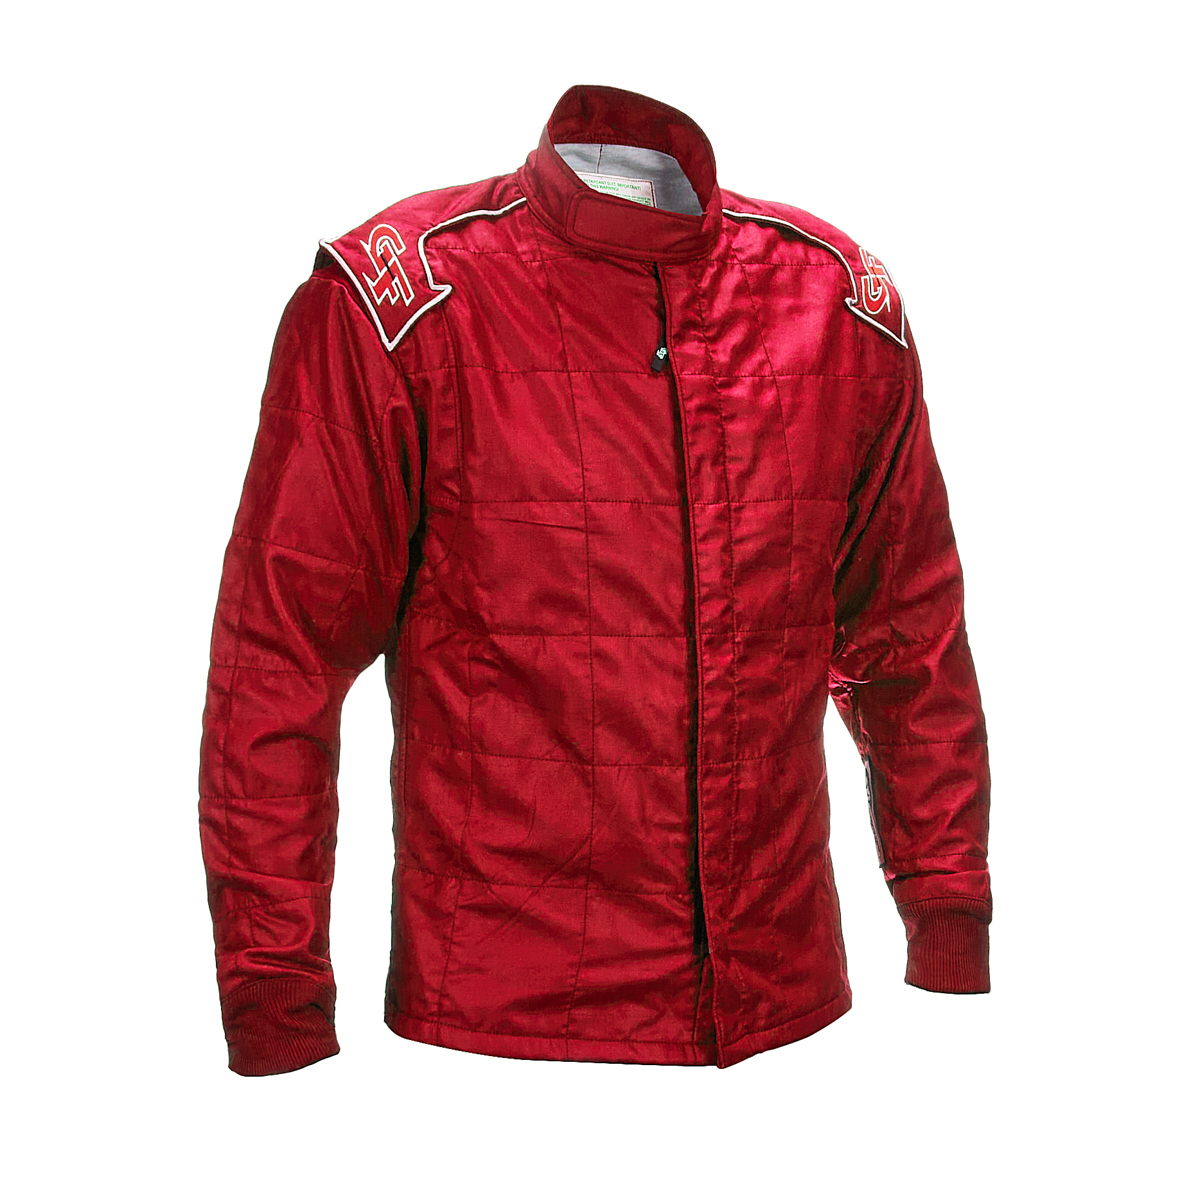 G-Force Racing Gear 35452MEDRD Driving Jacket, G-Limit, SFI 3.2A/5, Multiple Layer, Fire Retardant Cotton / Nomex, Red, Medium, Each